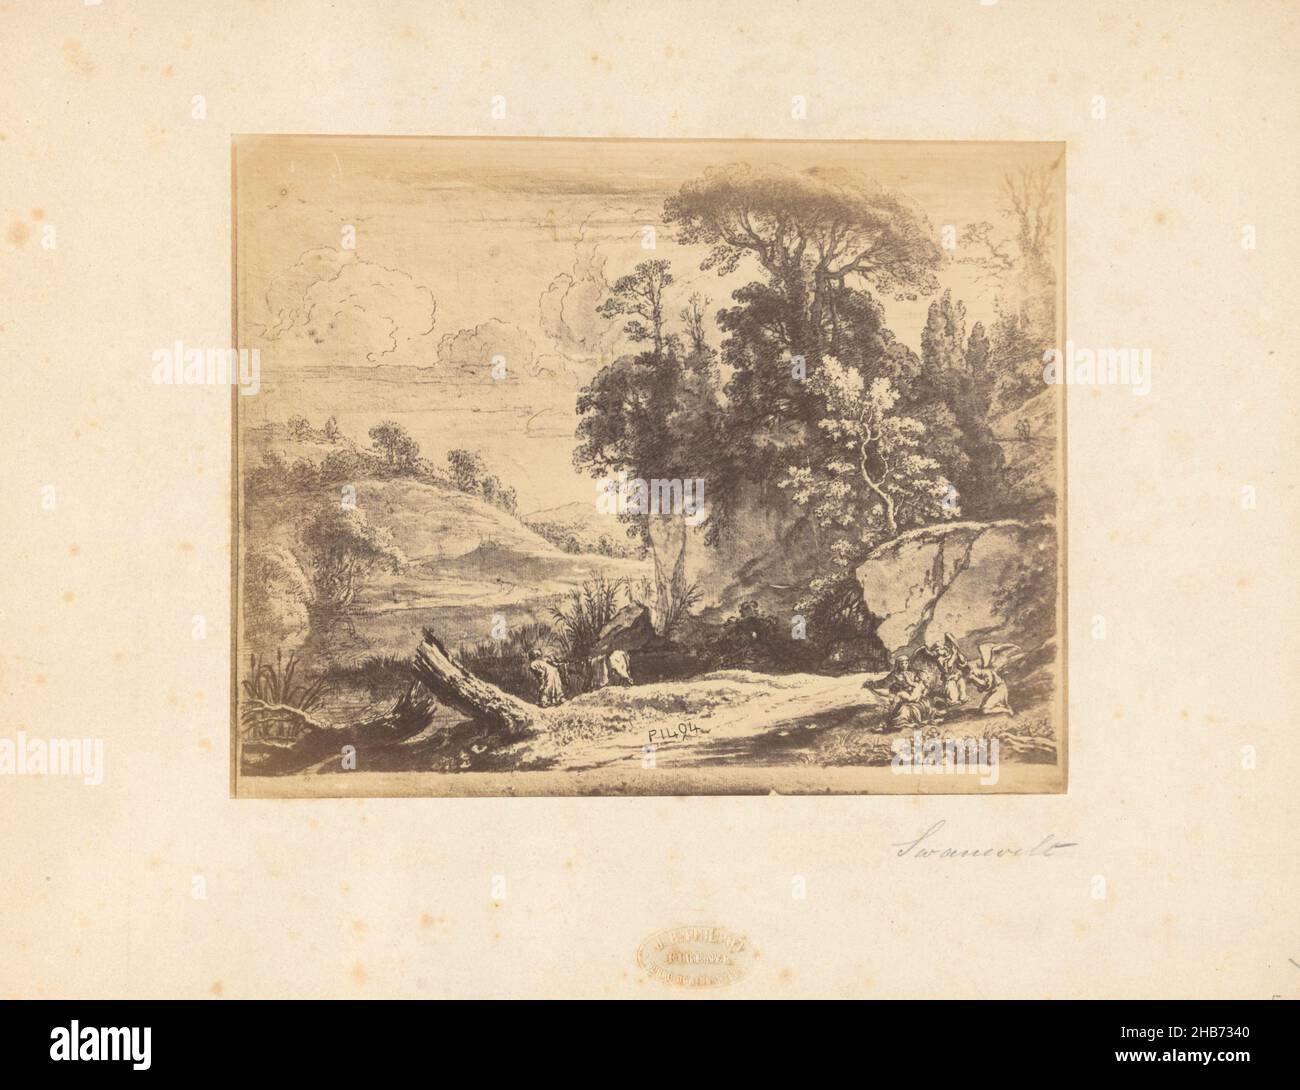 Photoreproduction of a drawing by Herman van Swanevelt, Giovanni Brampton Philpot (mentioned on object), intermediary draughtsman: Herman van Swanevelt (mentioned on object), Florence, 1851 - 1878, paper, cardboard, albumen print, height 152 mm × width 195 mmheight 249 mm × width 326 mm Stock Photo